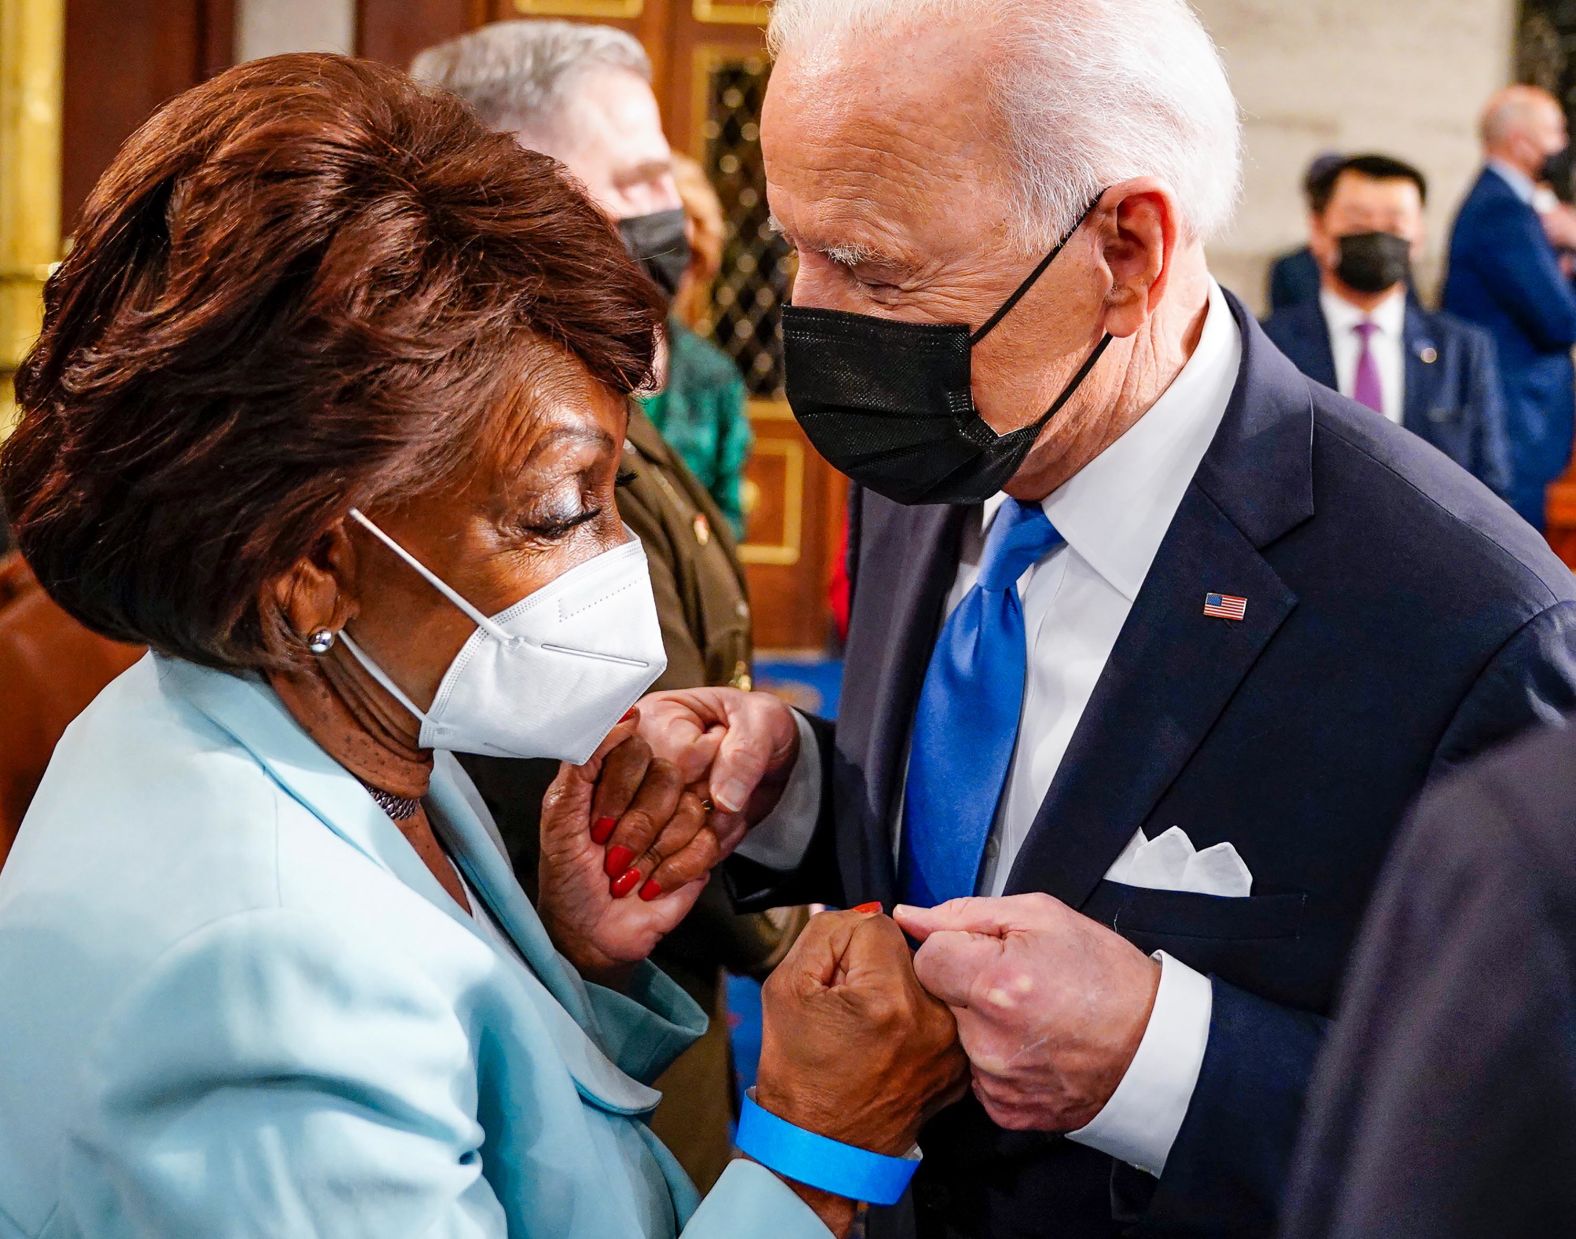 Biden fist-bumps US Rep. Maxine Waters after his speech, which lasted an hour and five minutes.